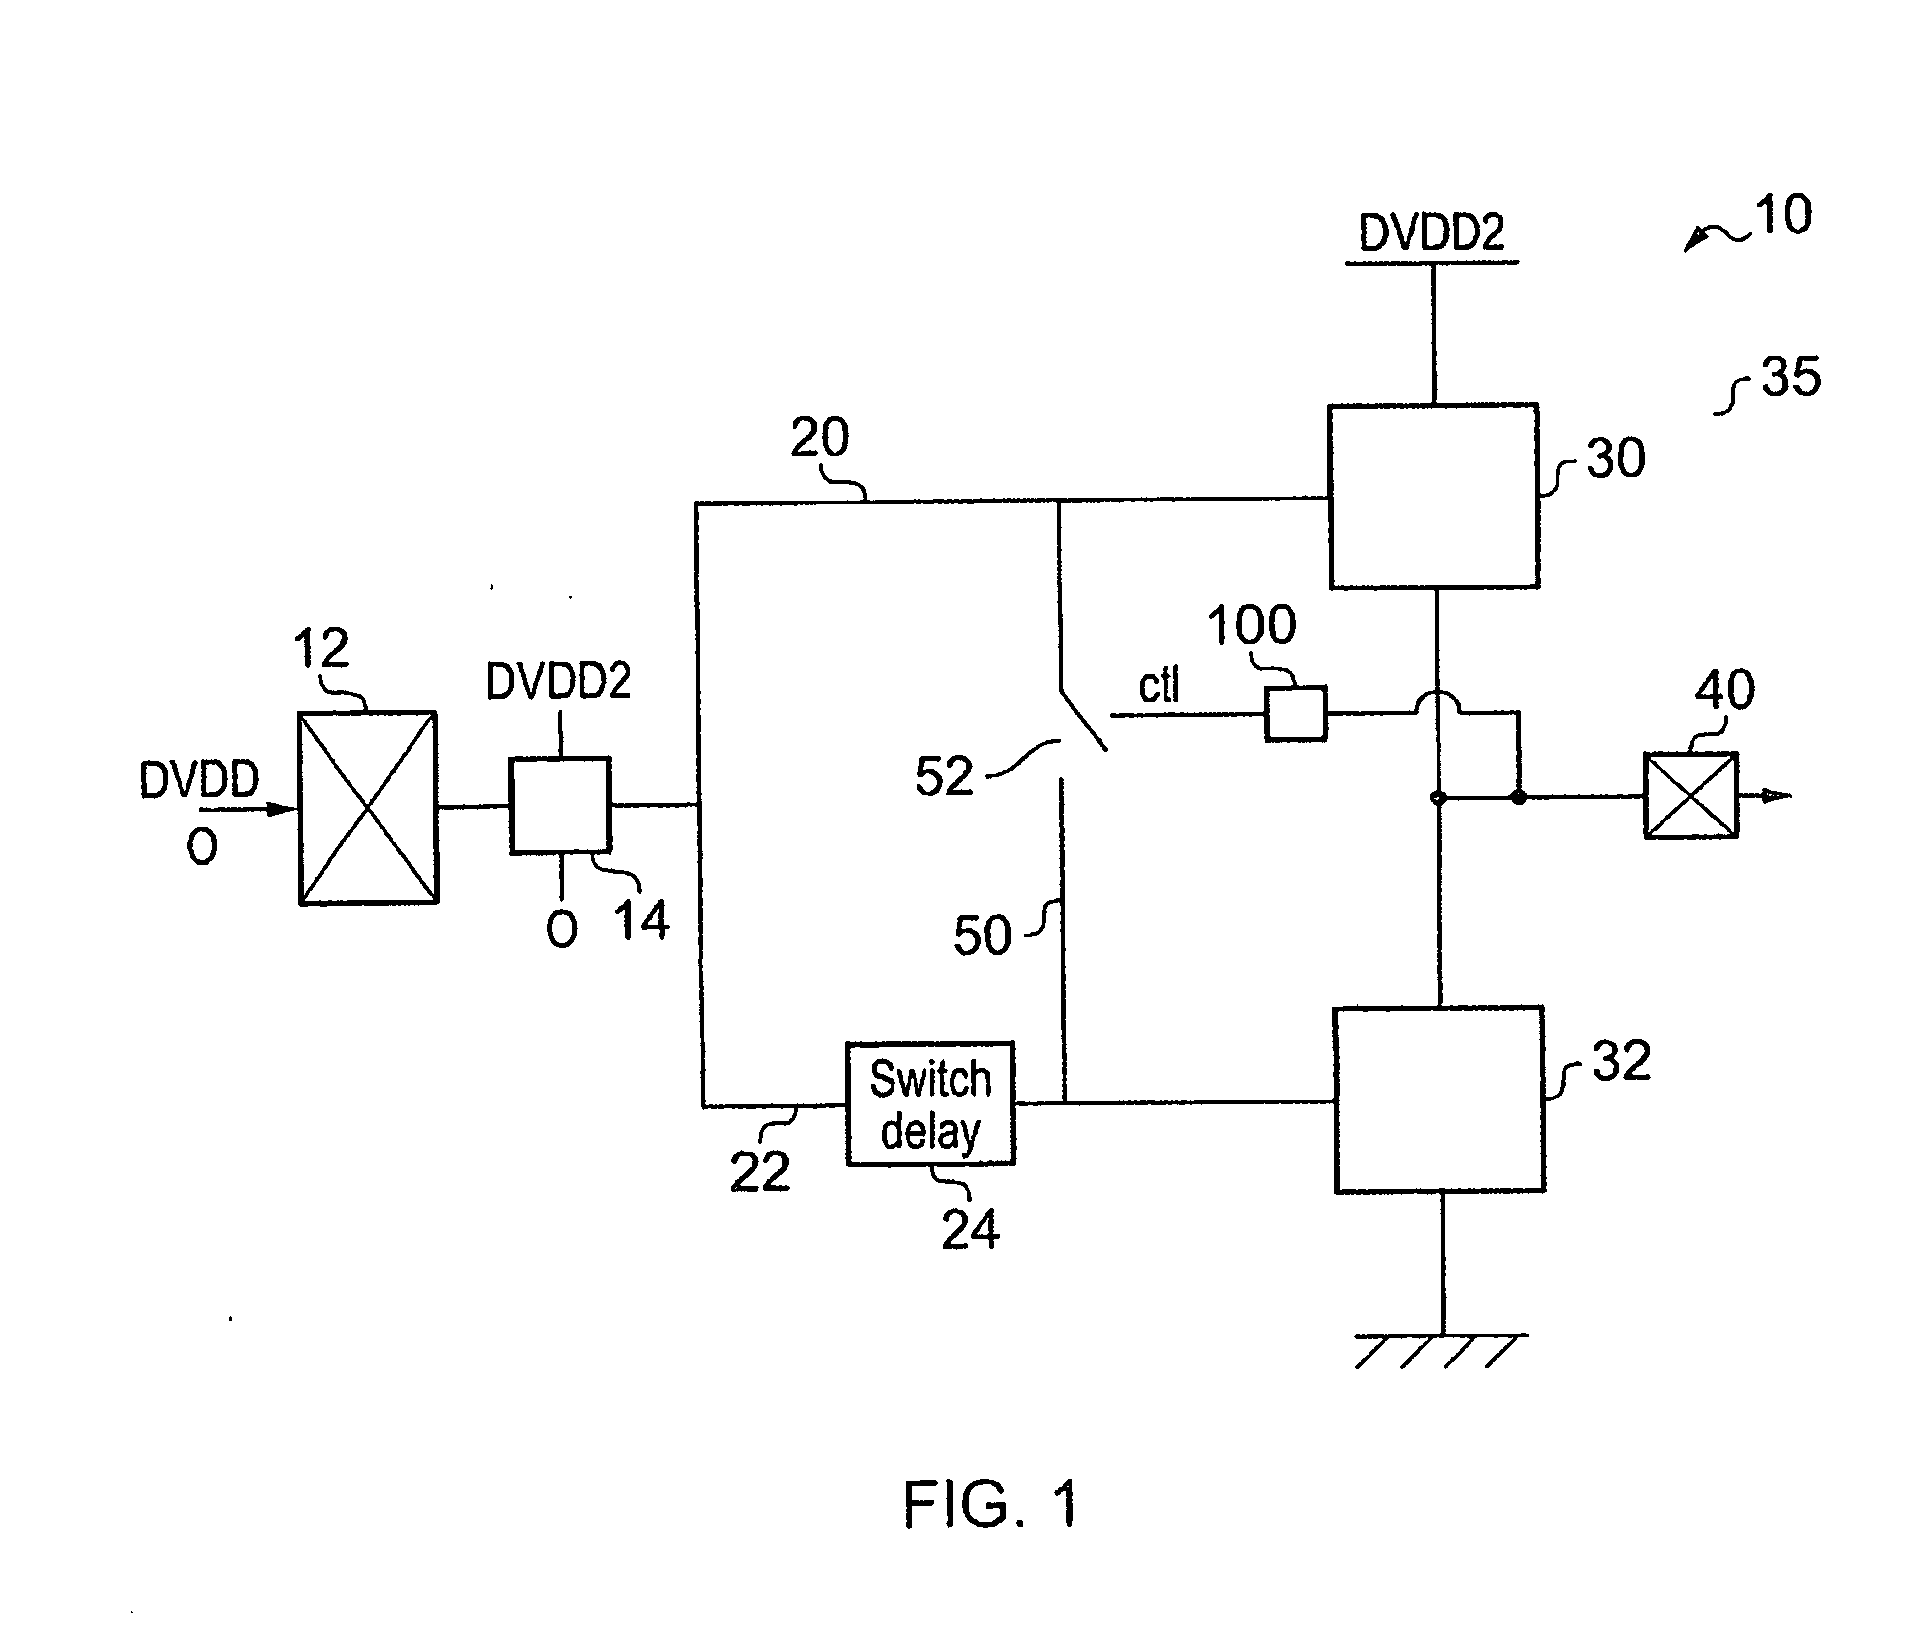 Circuitry for processing signals from a higher voltage domain using devices designed to operate in a lower voltage domain